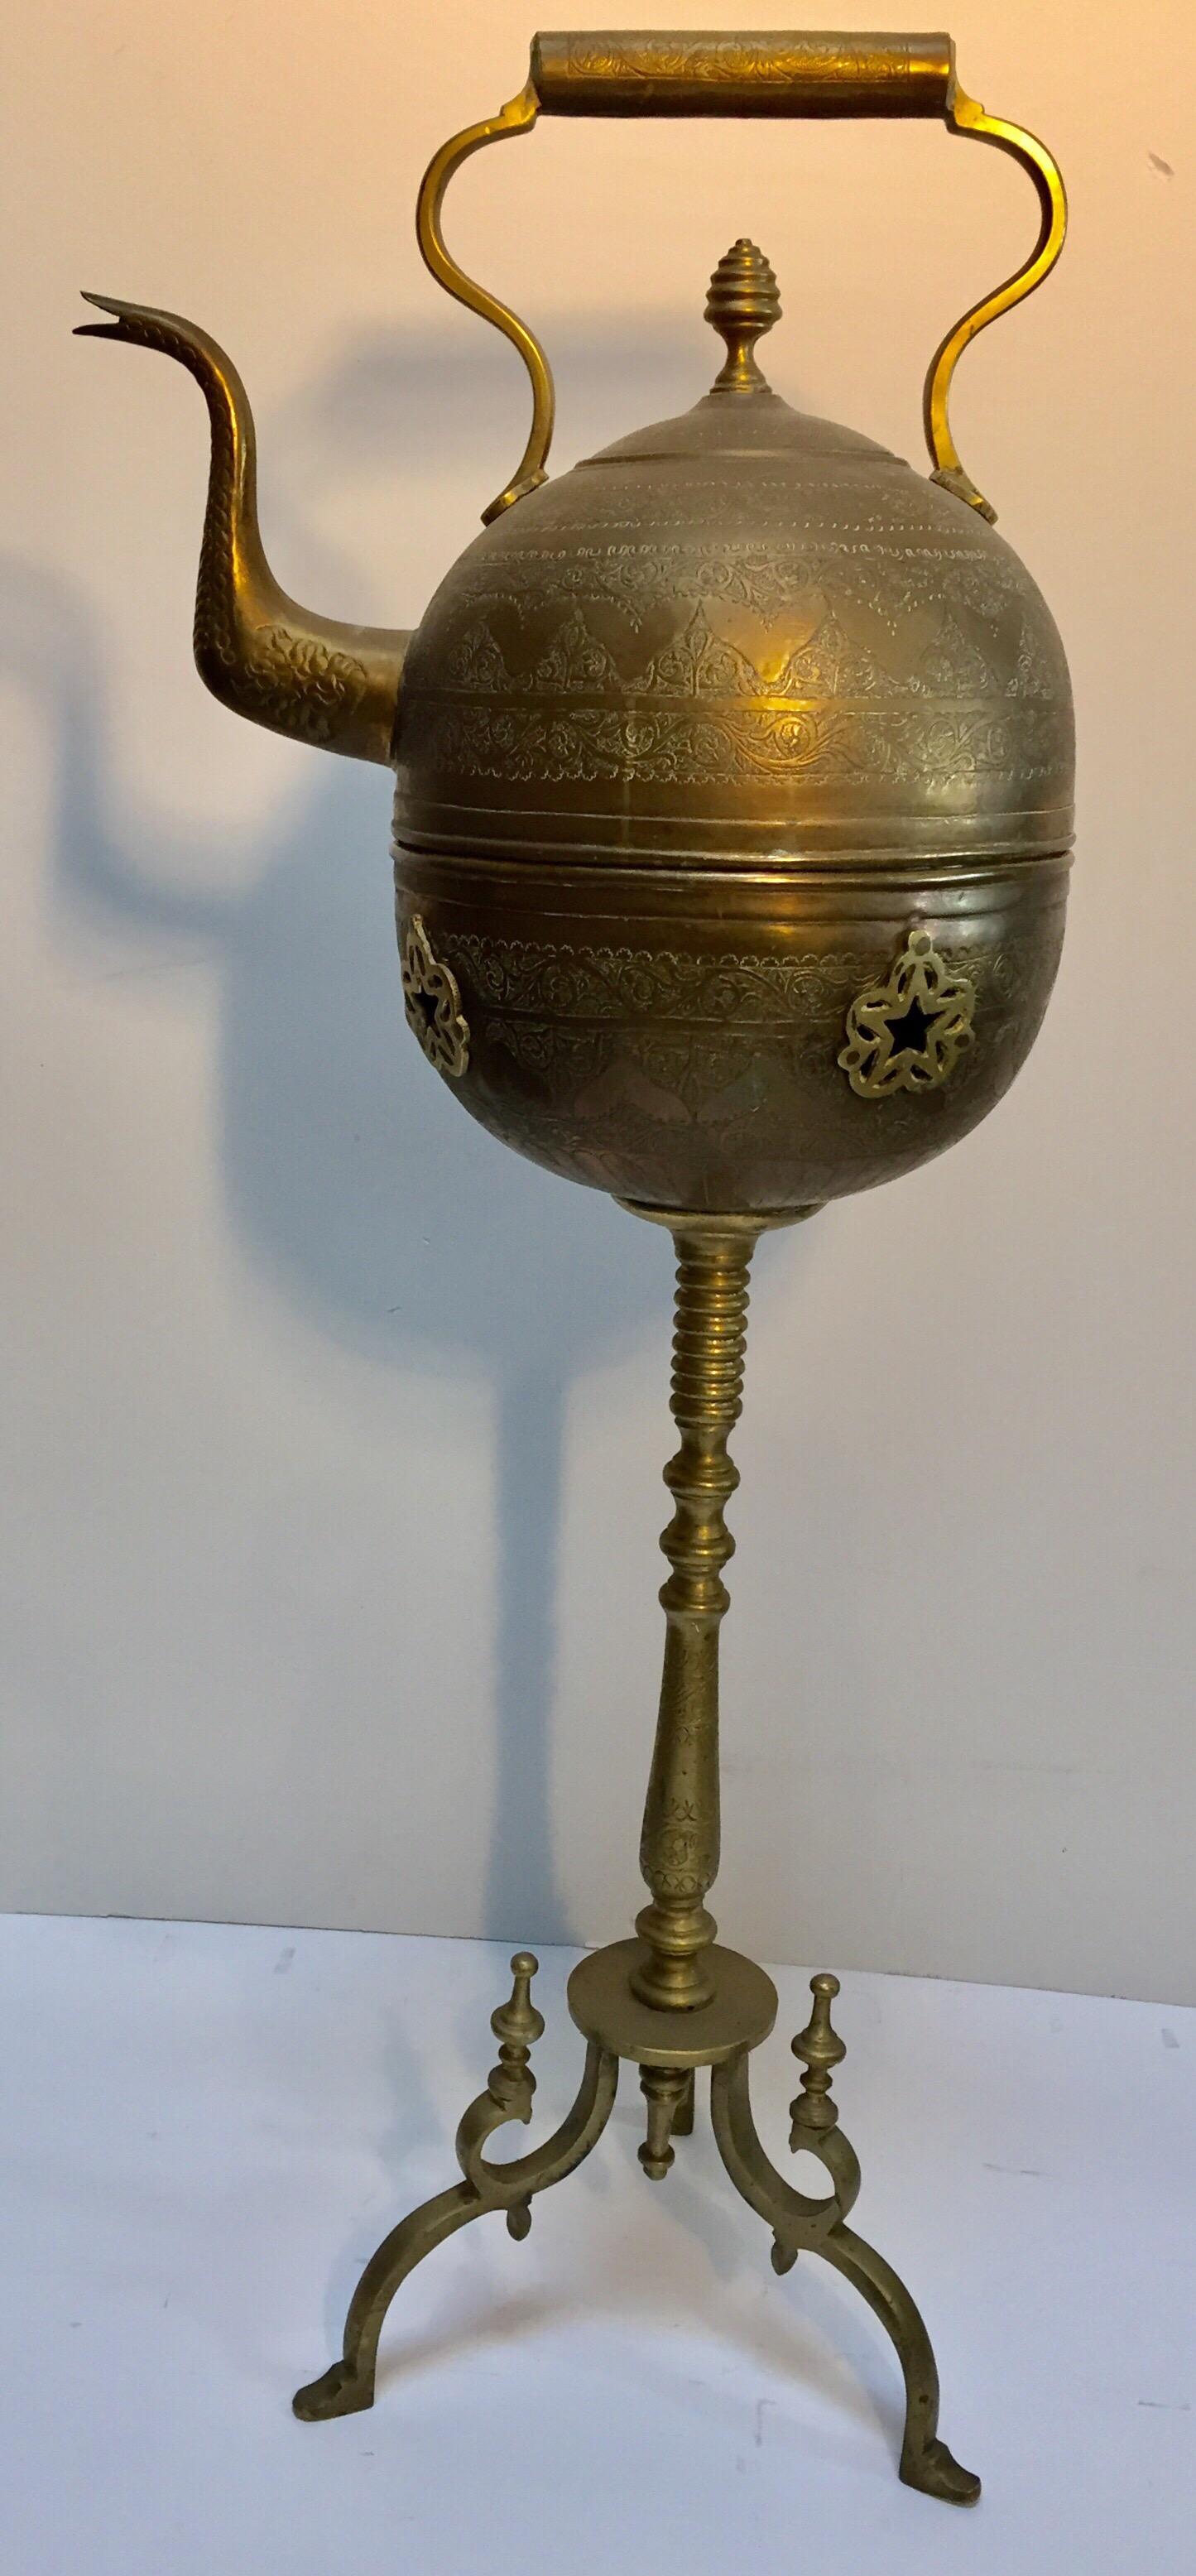 Moroccan antique brass tea kettle pot with warmer on stand.
Museum quality, one of a kind antique artistically and delicately handcrafted tea water pot.
Solid brass, hand hammered, chased, engraved with floral and geometric designs.
The brass